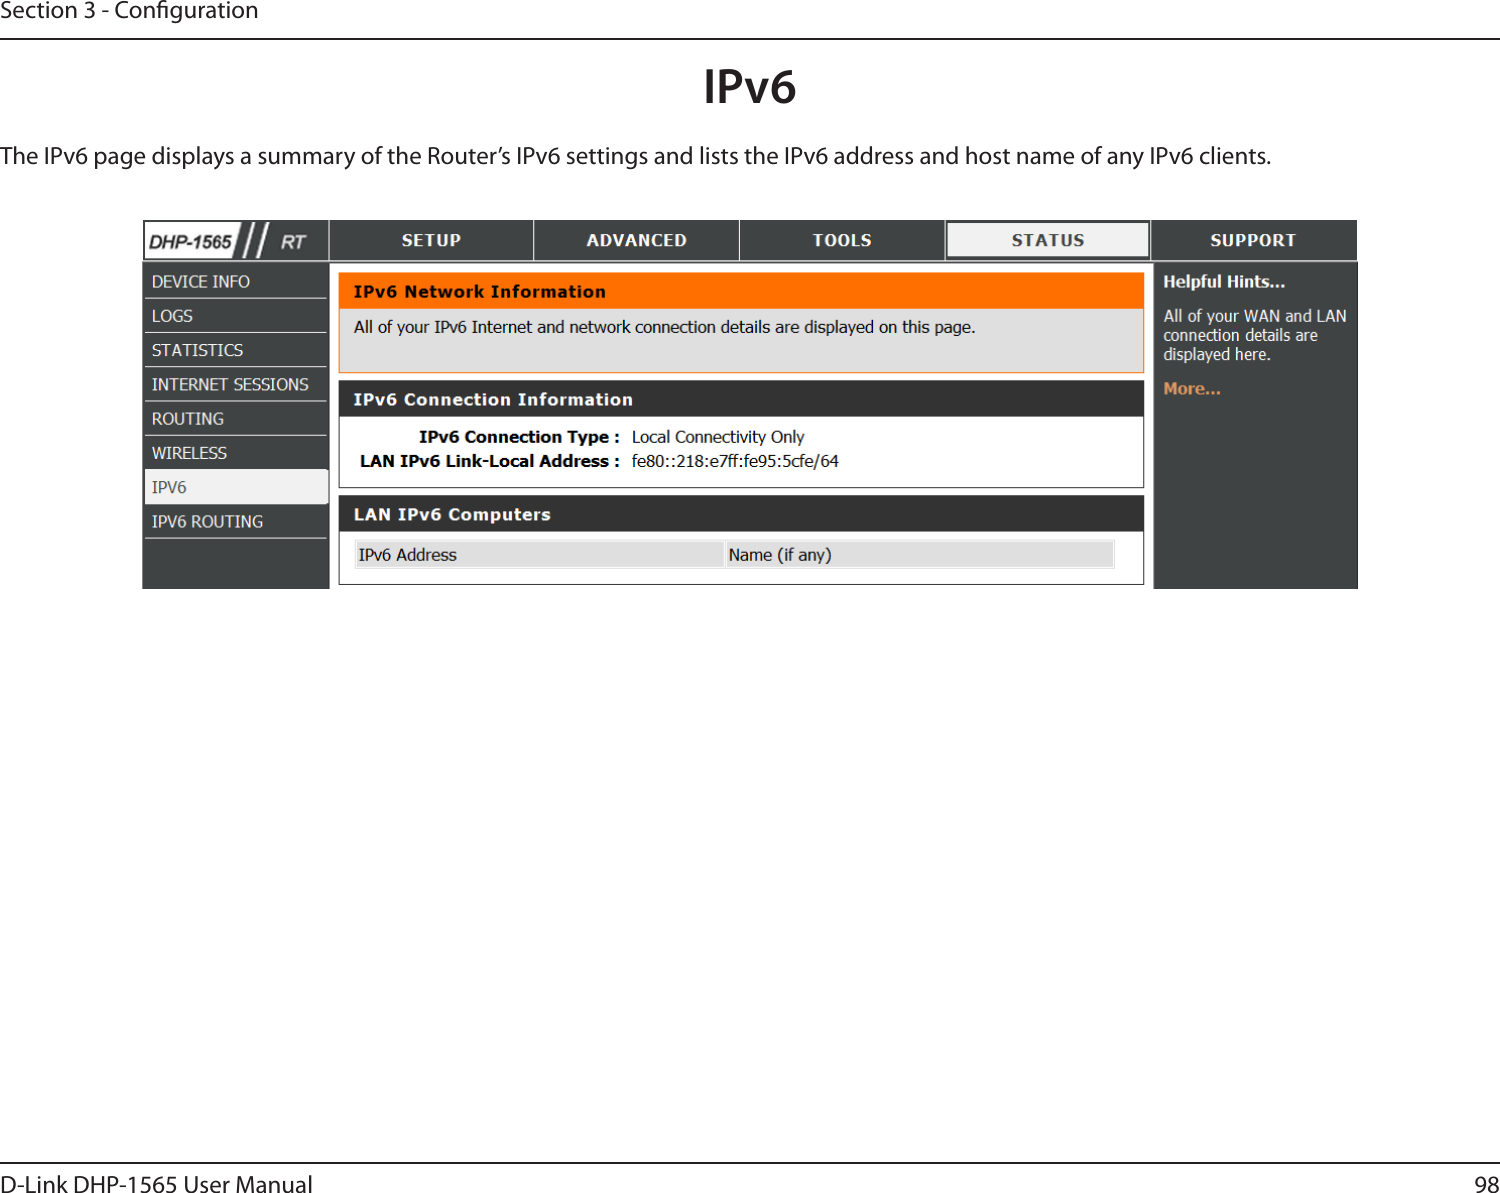 98D-Link DHP-1565 User ManualSection 3 - CongurationIPv6The IPv6 page displays a summary of the Router’s IPv6 settings and lists the IPv6 address and host name of any IPv6 clients. 